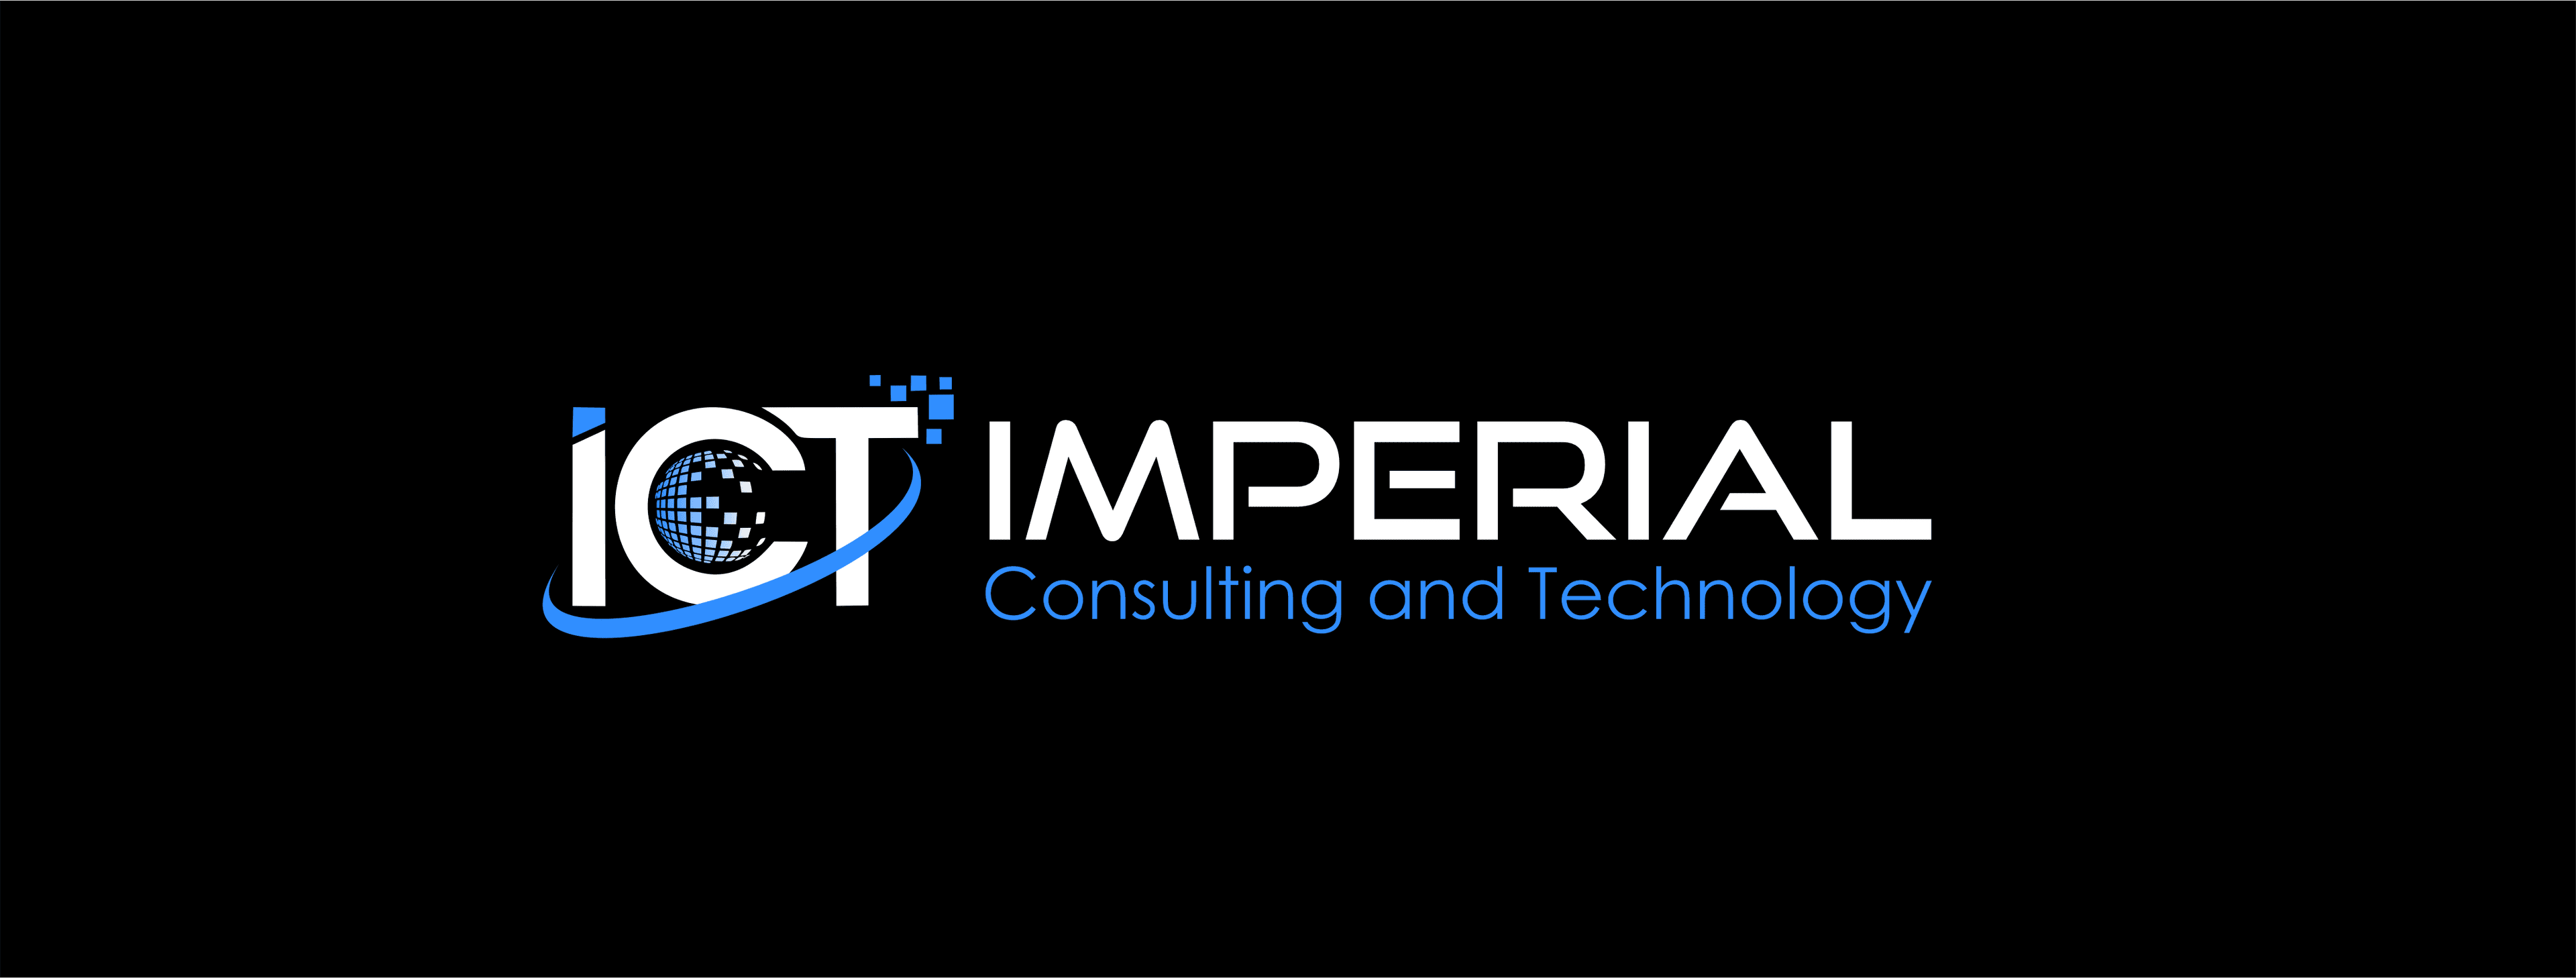 Product Crowdsource - Imperial Consulting & Technology image